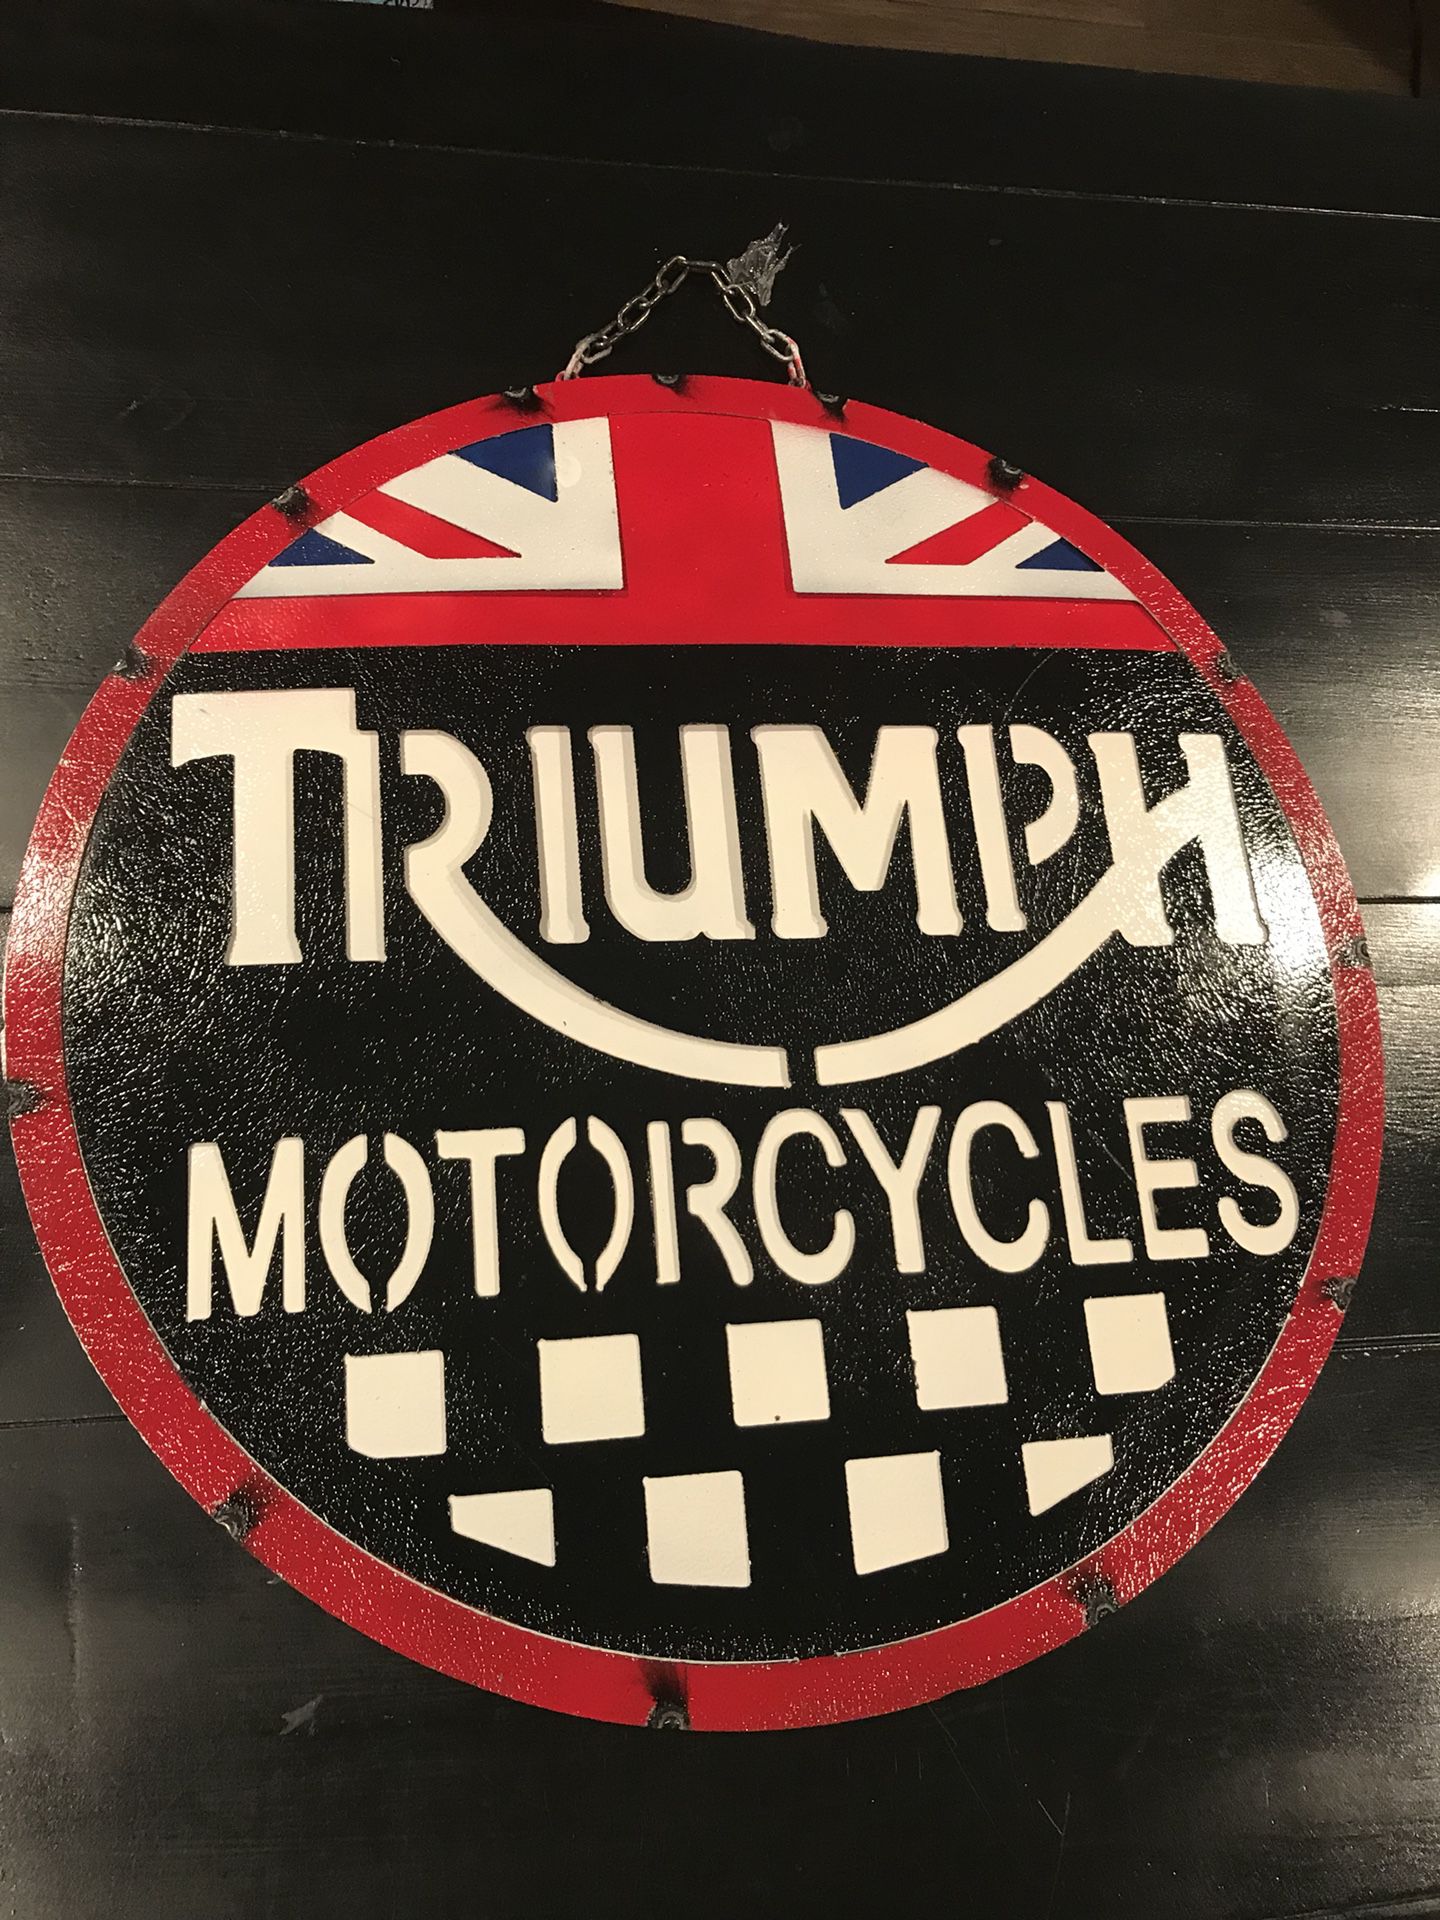 Triumph Motorcycles Handcrafted Metal Sighn Man Cave Garage Sign $45 firm no offers